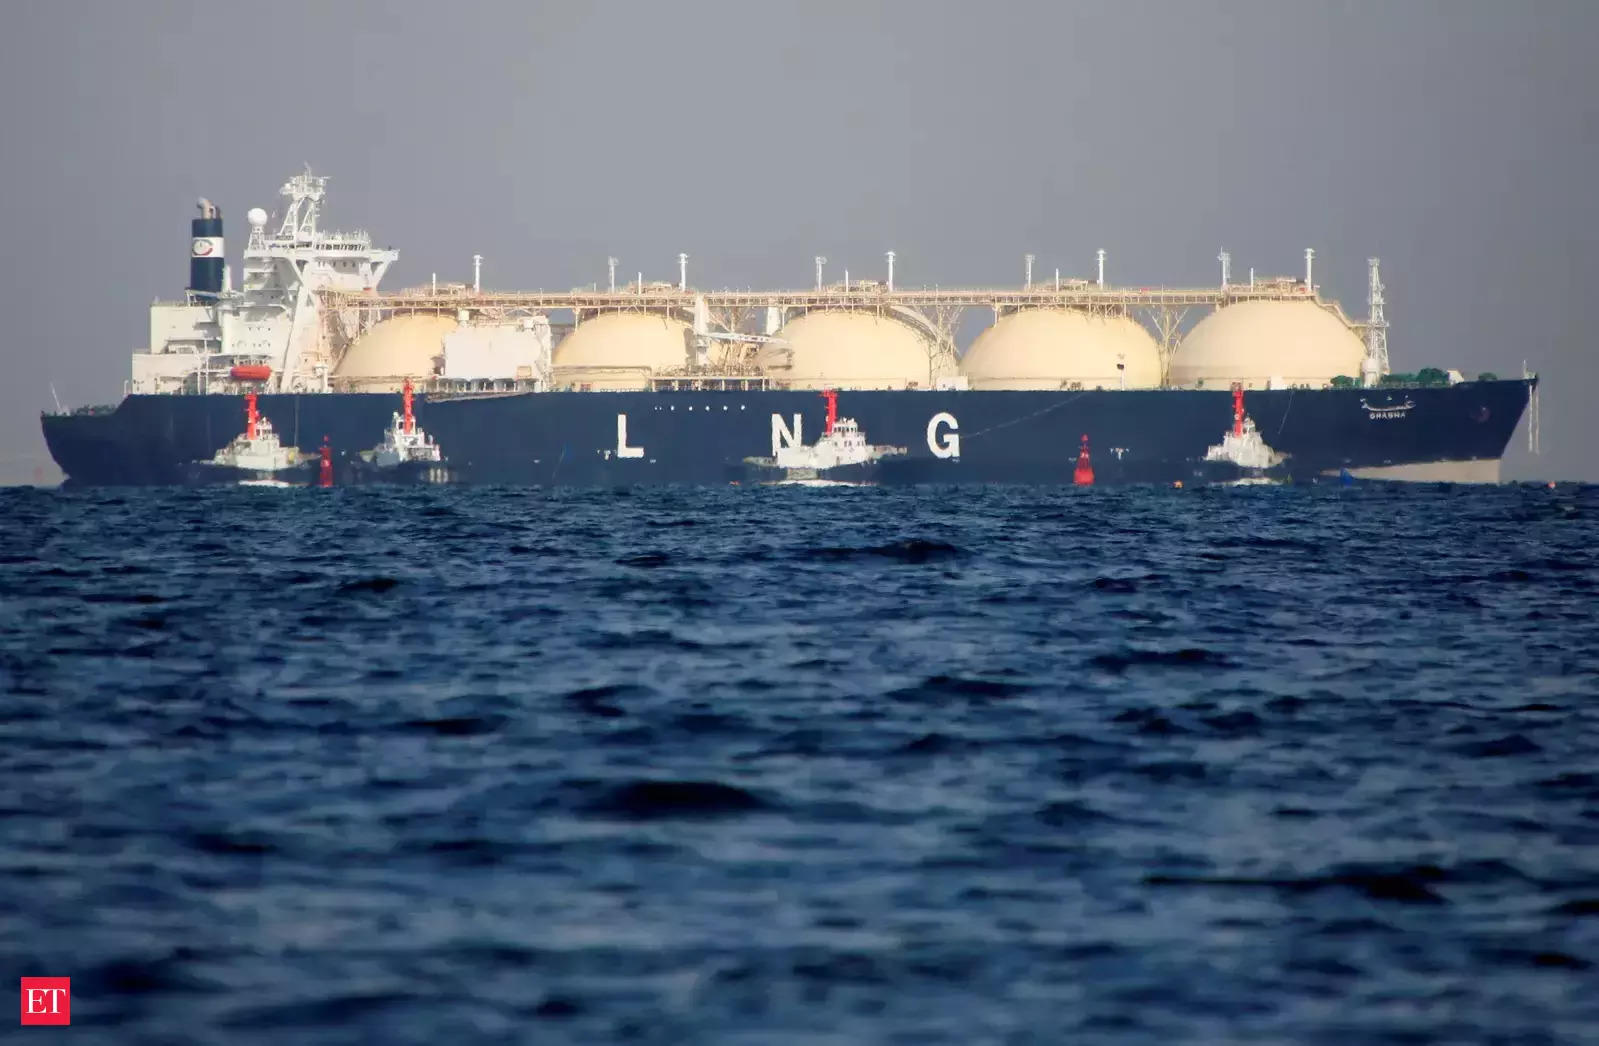 IOC signs $7-9 bn LNG import deal with UAE's ADNOC Gas, Infra News, ET Infra